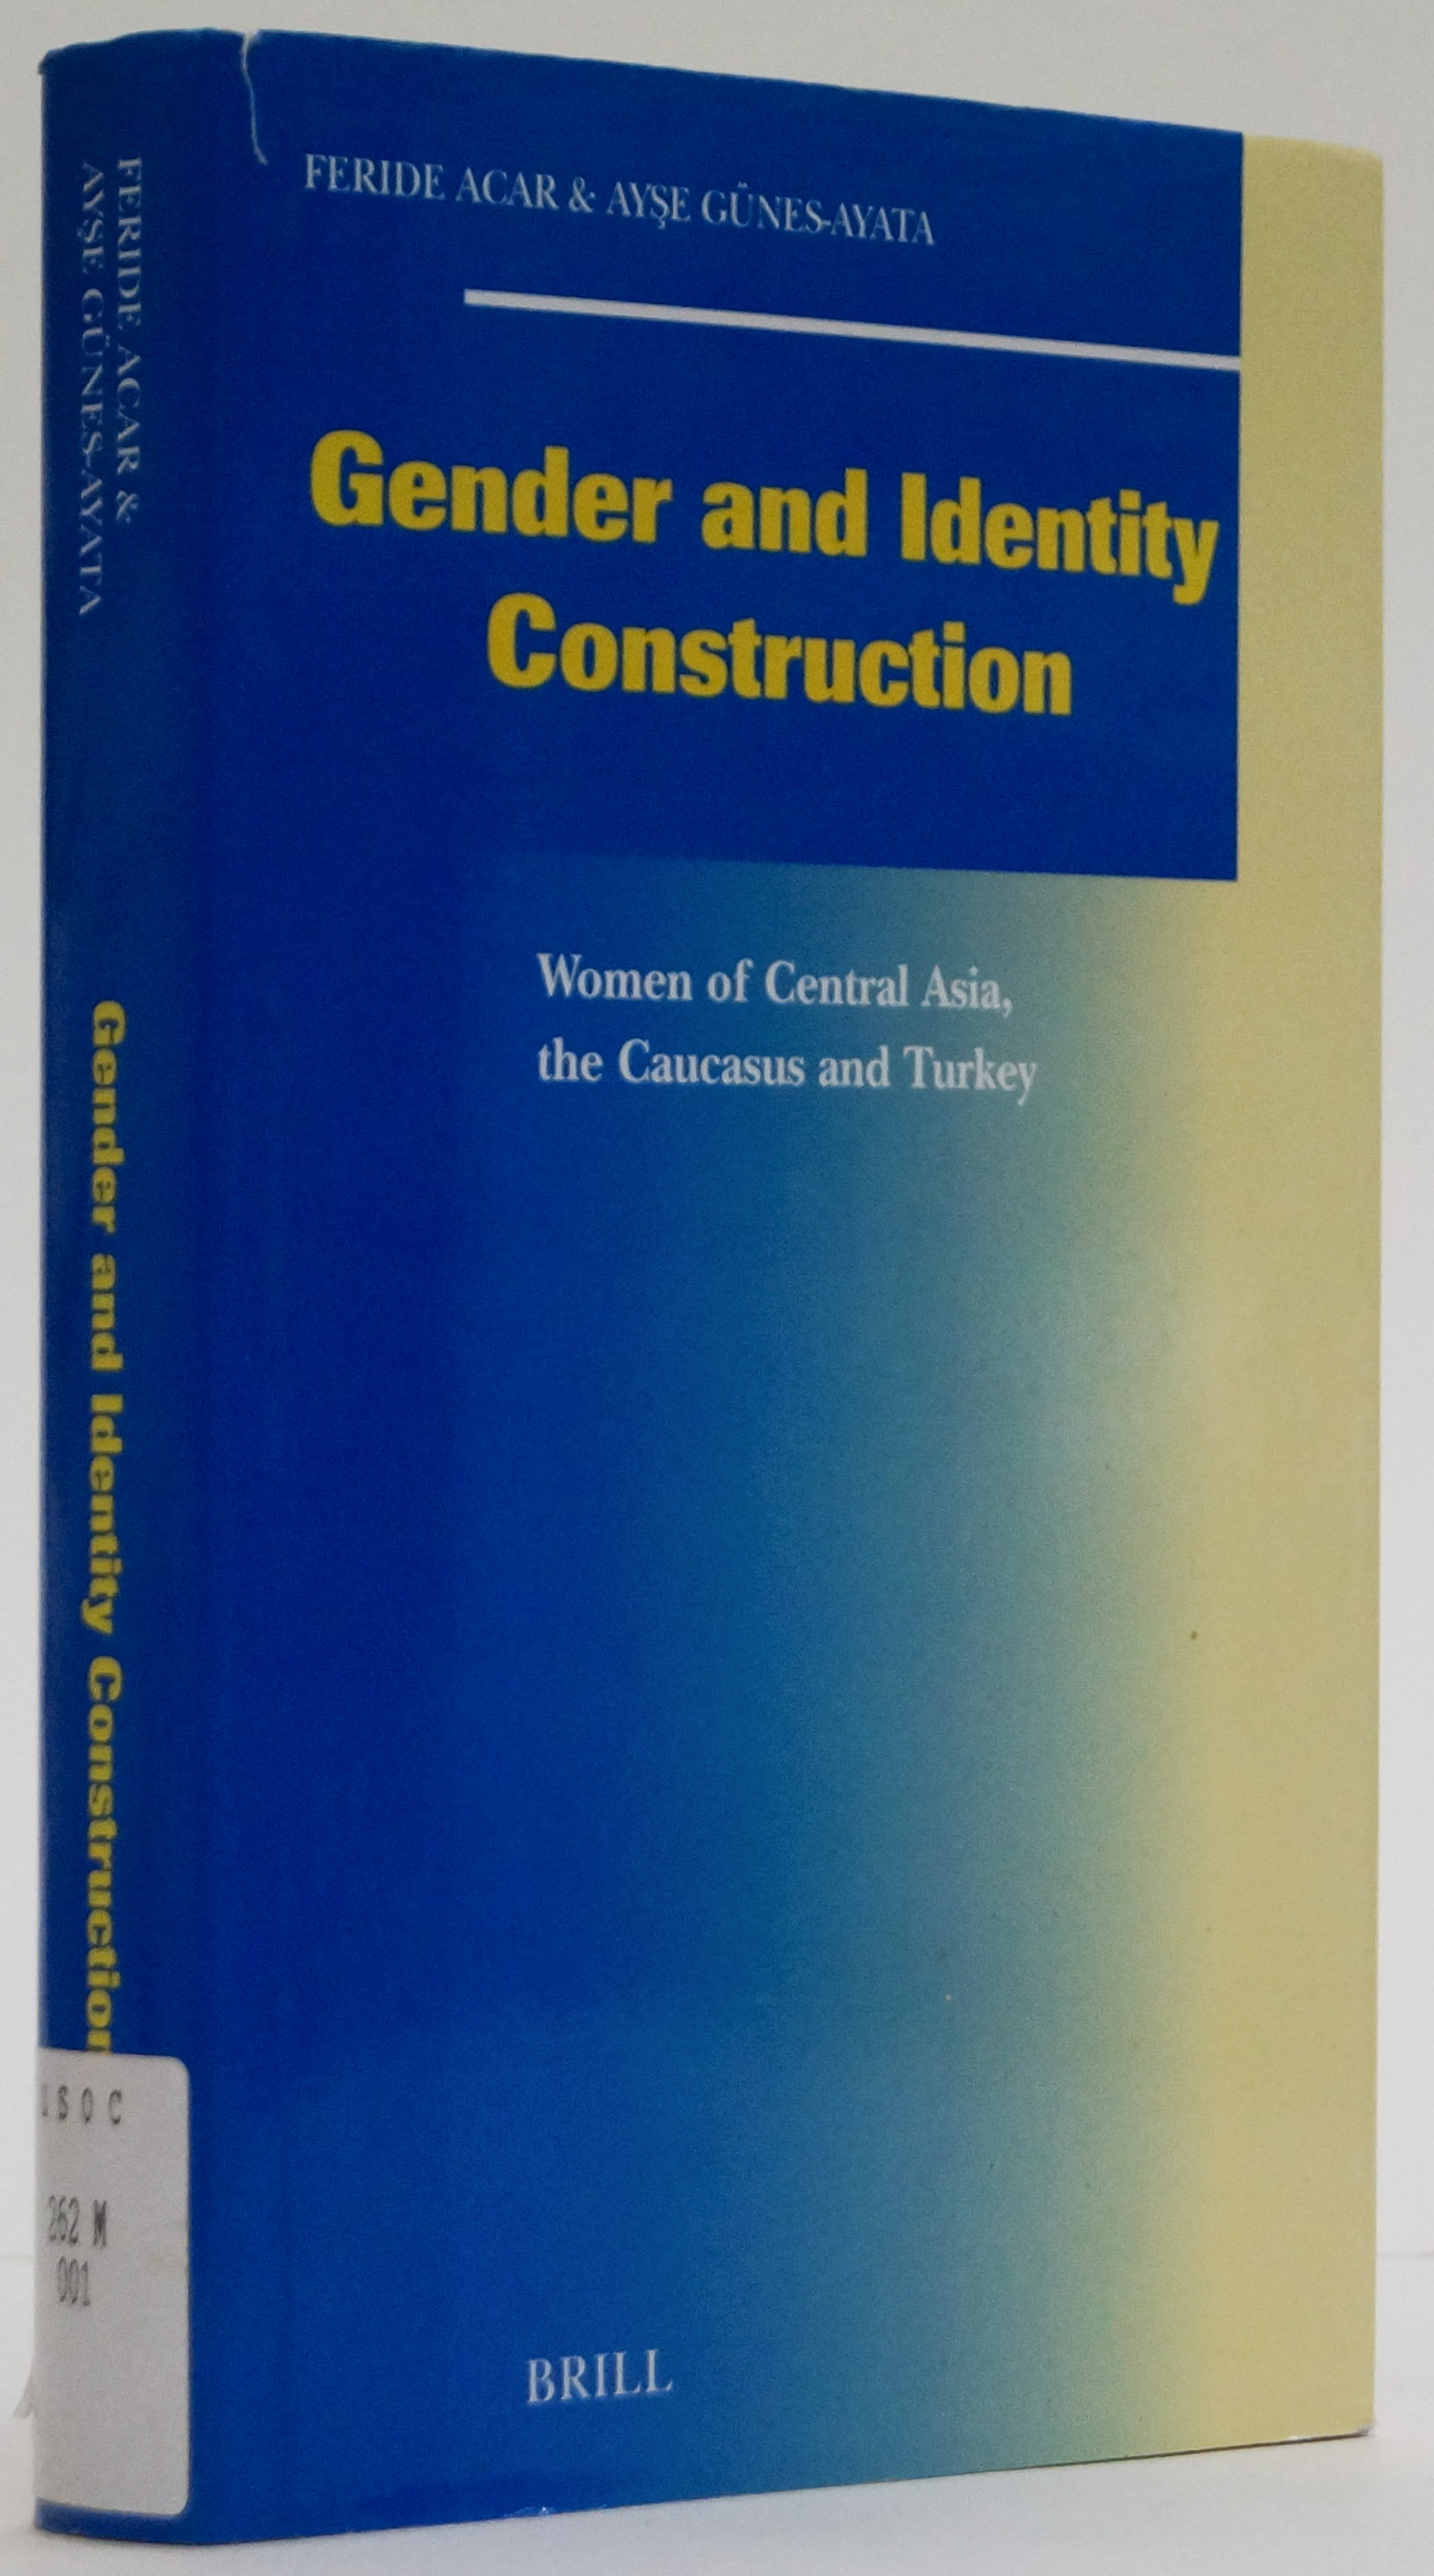 ACAR, F., GNES-AYATA, A., (ED.) - Gender and identity construction. Women of Central Asia, the Caucacus and Turkey.